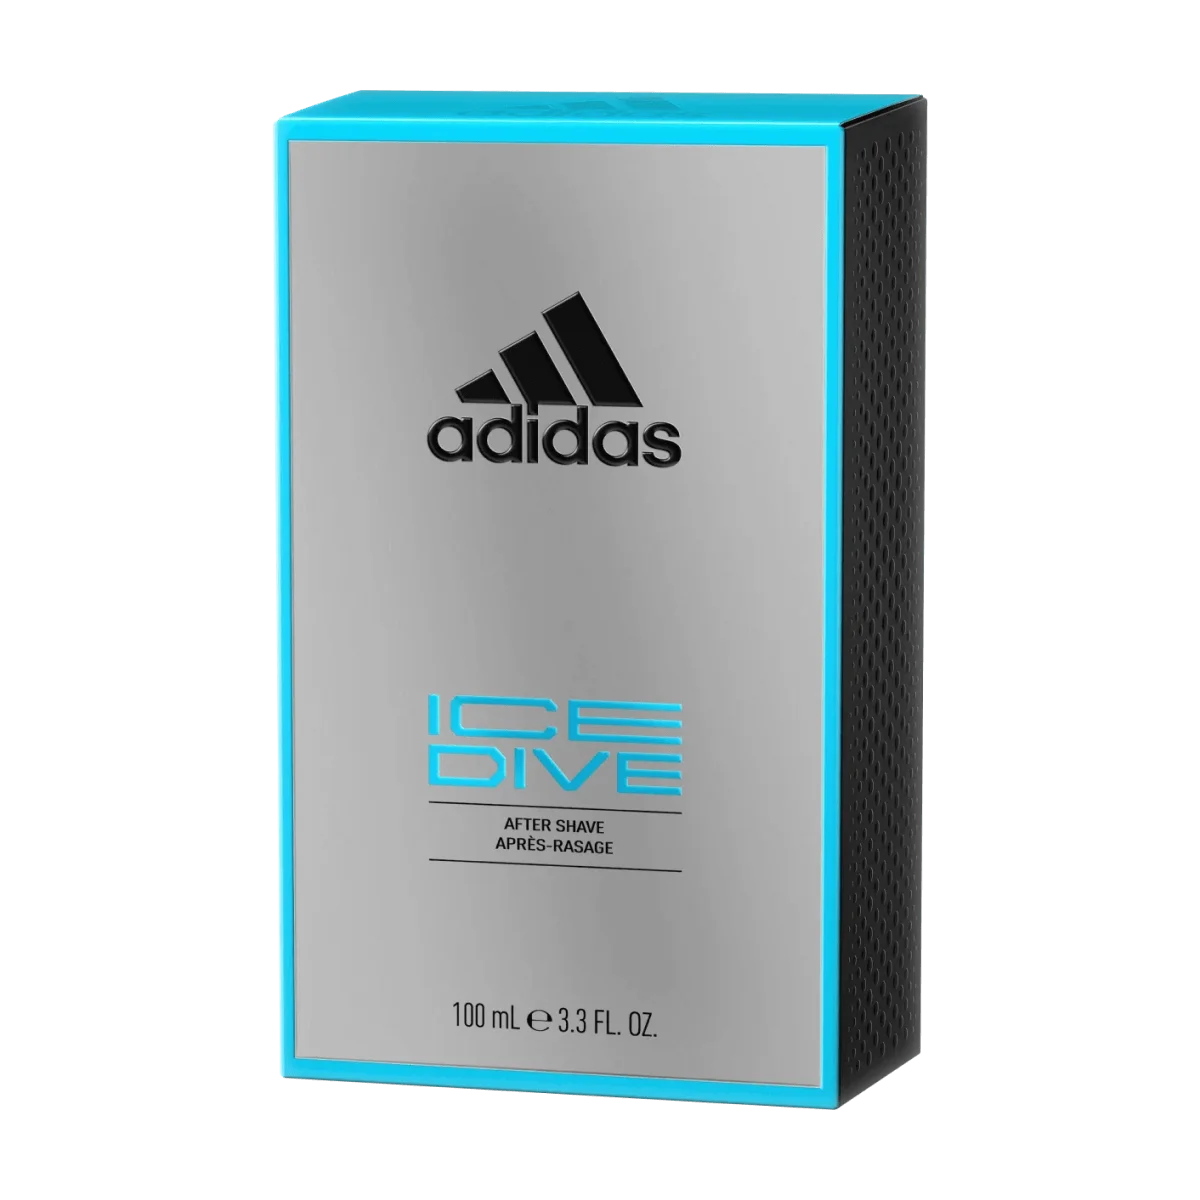 Adidas After Shave Ice Dive, 100 ml